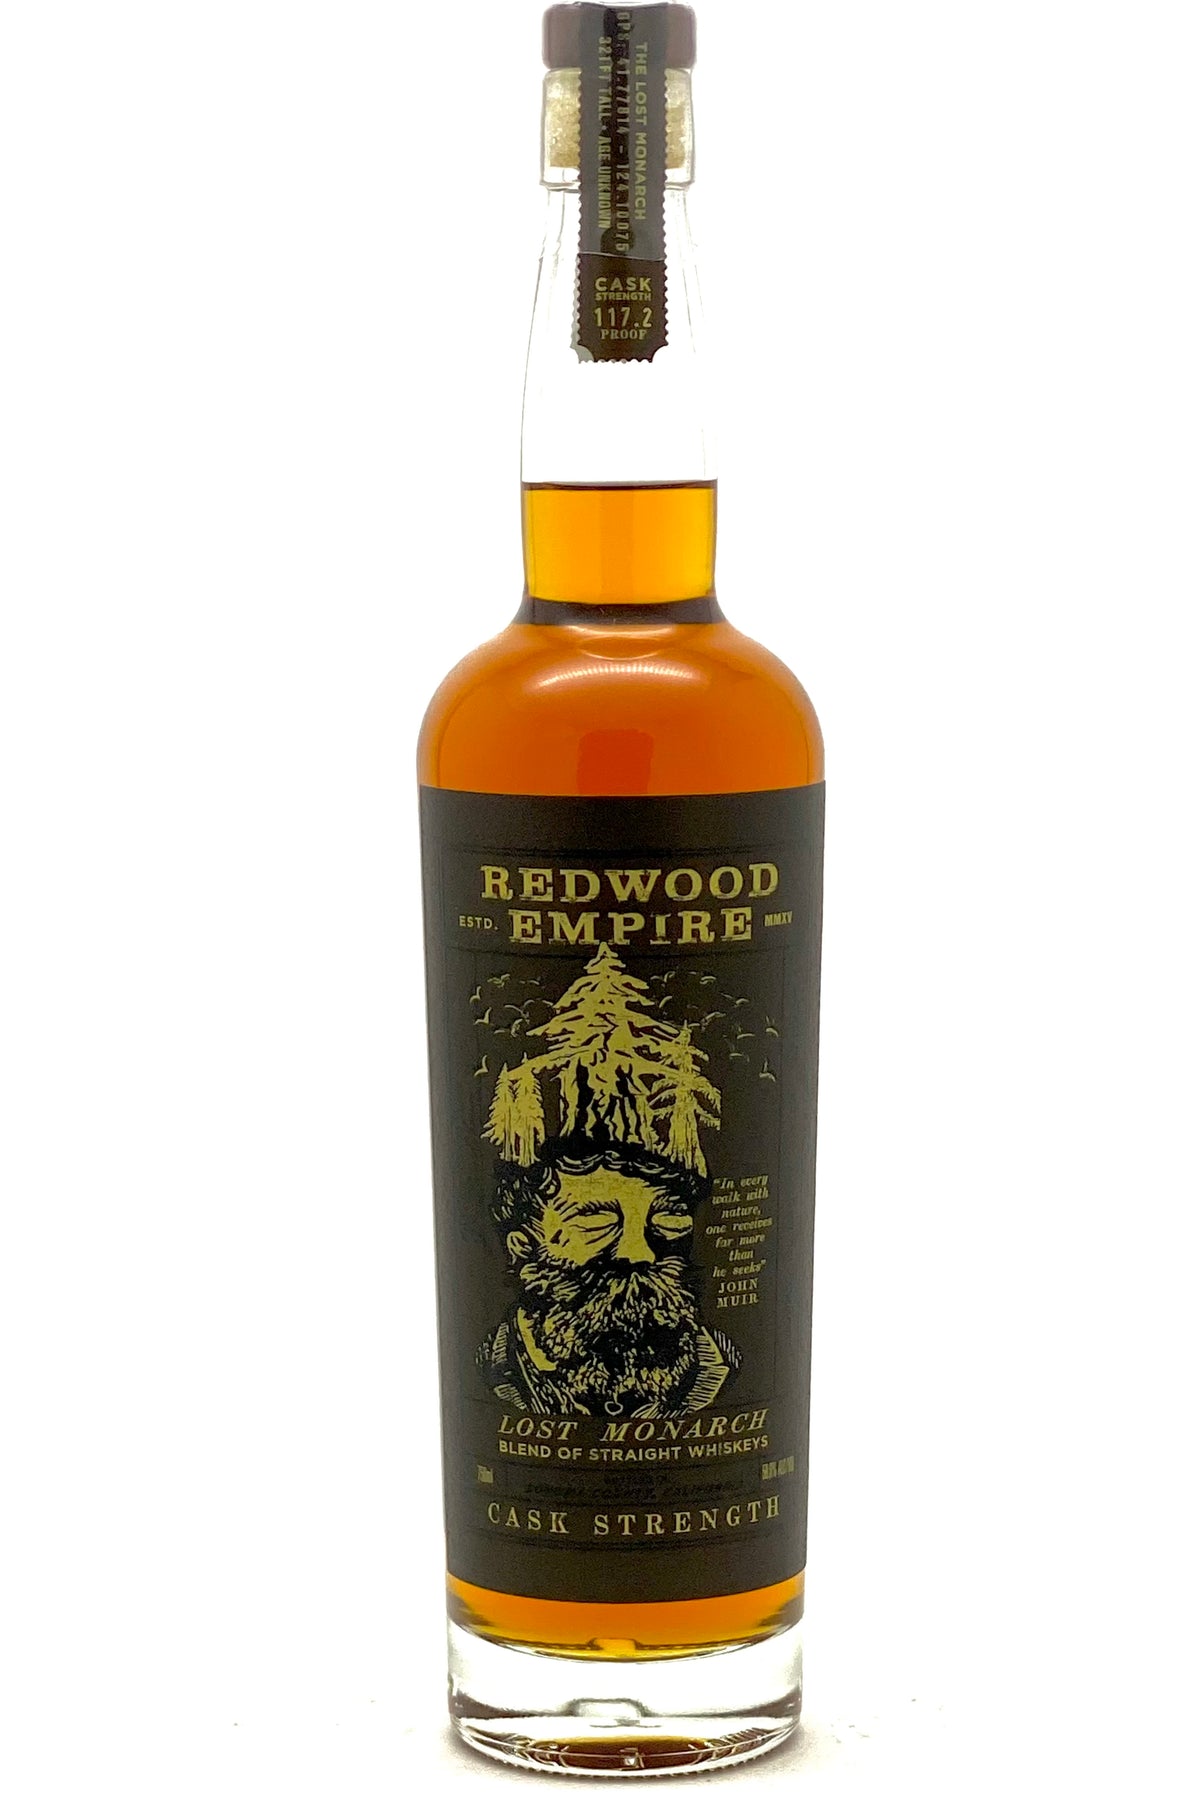 Redwood Empire Lost Monarch Cask Strength American Whiskey